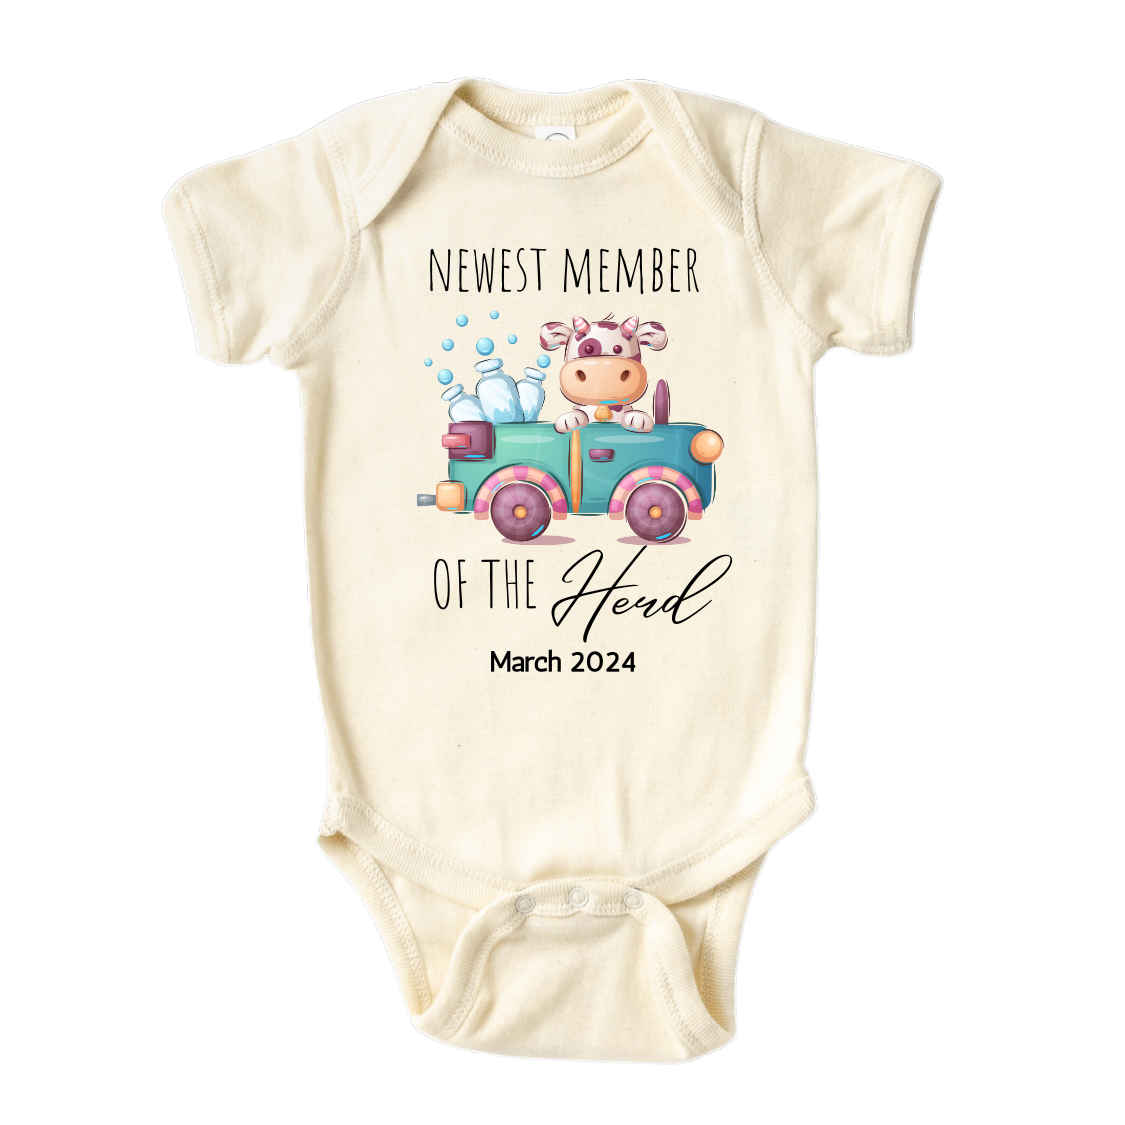 baby bodysuit gender neutral baby clothes baby boy outfits baby onesies newborn onesies baby girl onesies funny baby onesies baby announcement onesie personalized baby girl gifts custom baby onesie infant clothes cute baby girl clothes funny baby clothes newborn onesies unisex newborn boy onesies funny onesies for babies cute baby stuff